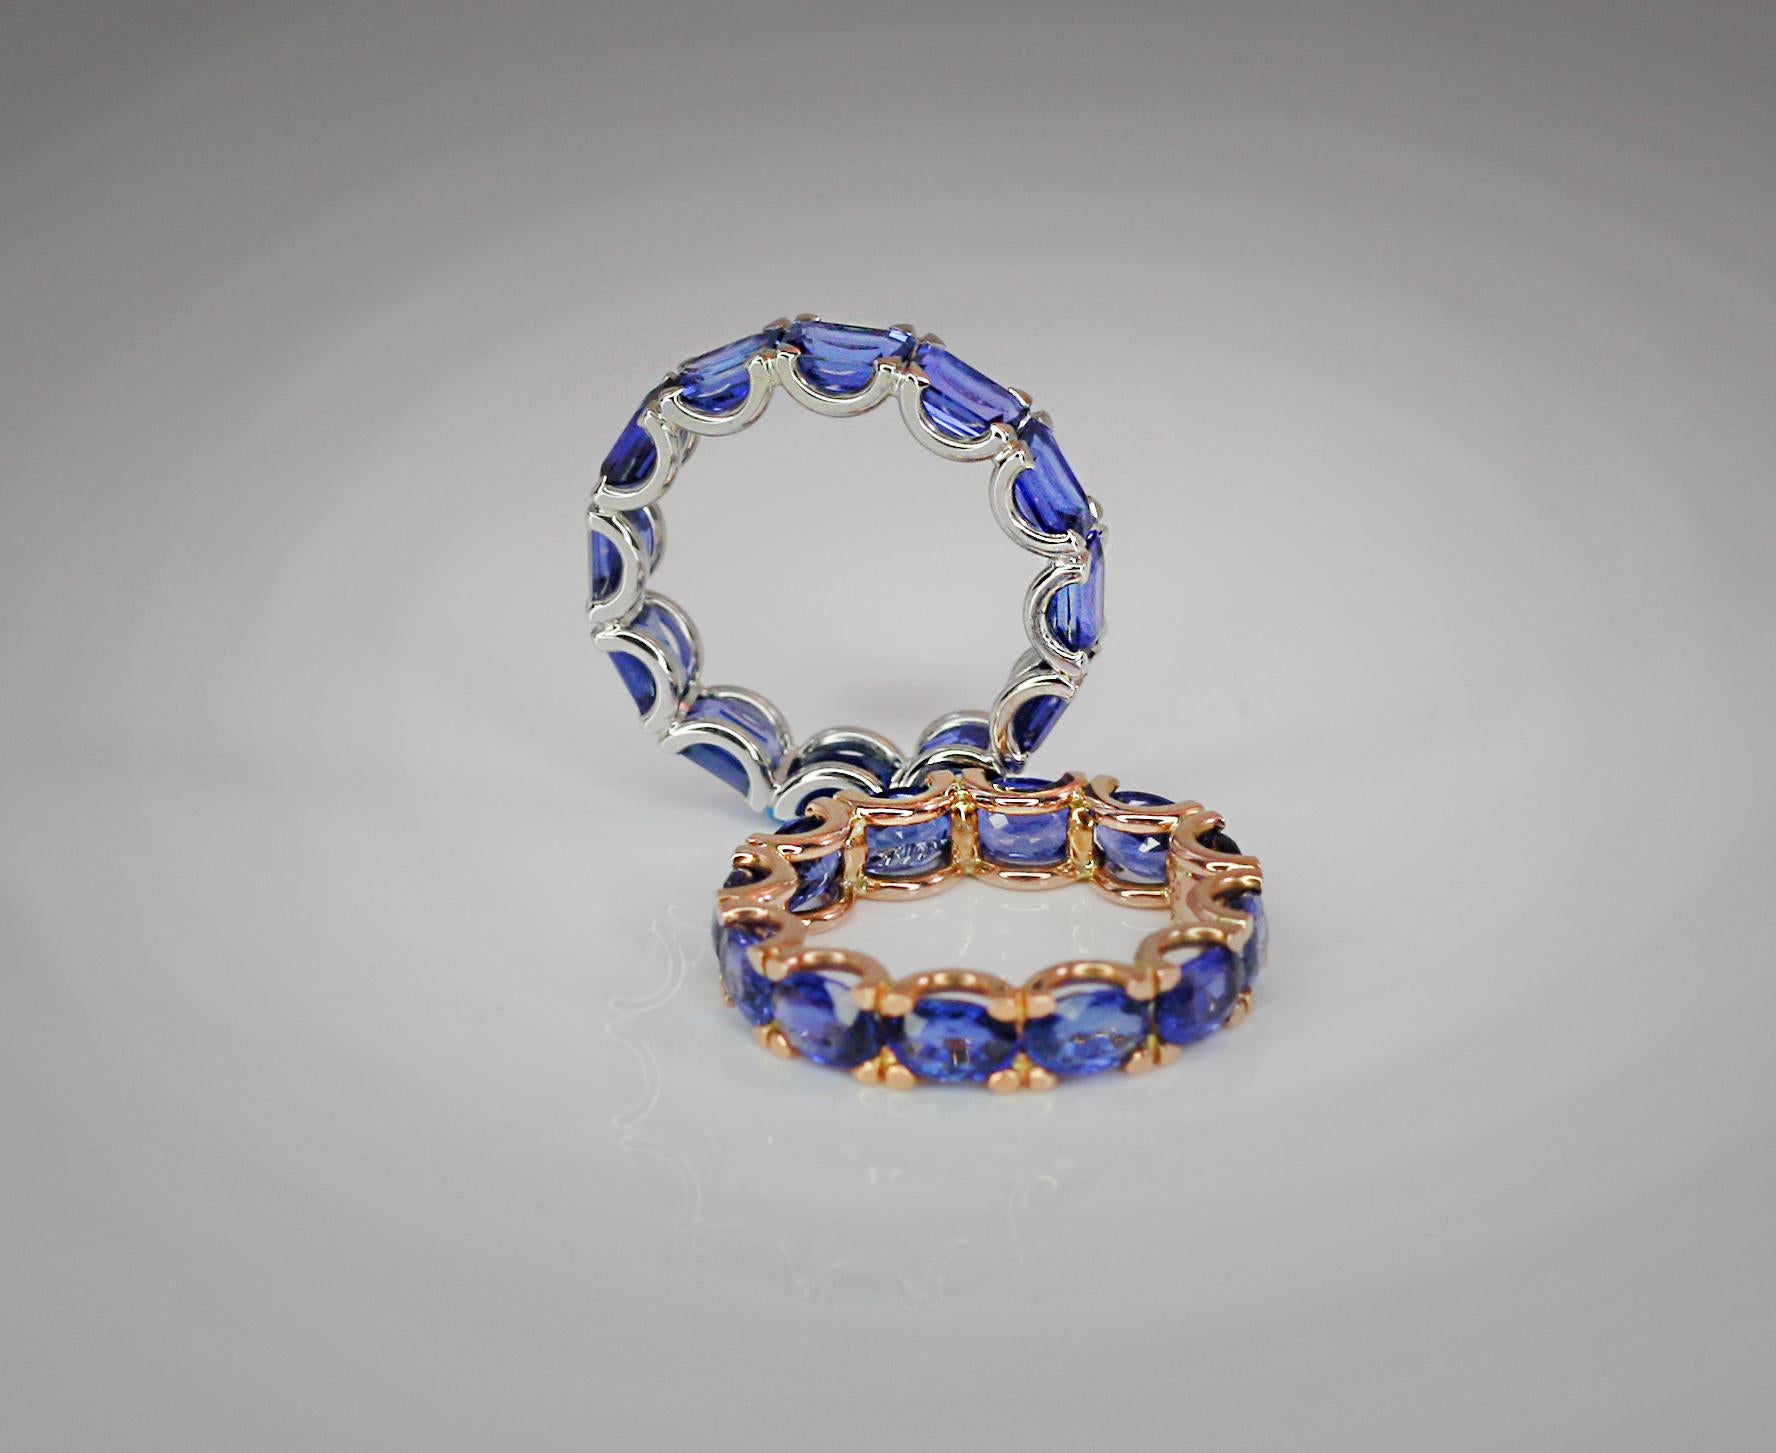 This S.Georgios designer eternity band Ring is all hand-made in 18 Karat Rose Gold and features oval cut natural Blue Sapphires total weight of 7.38 Carat. The magic of this beautiful band is that we selected all the sapphires to be of identical